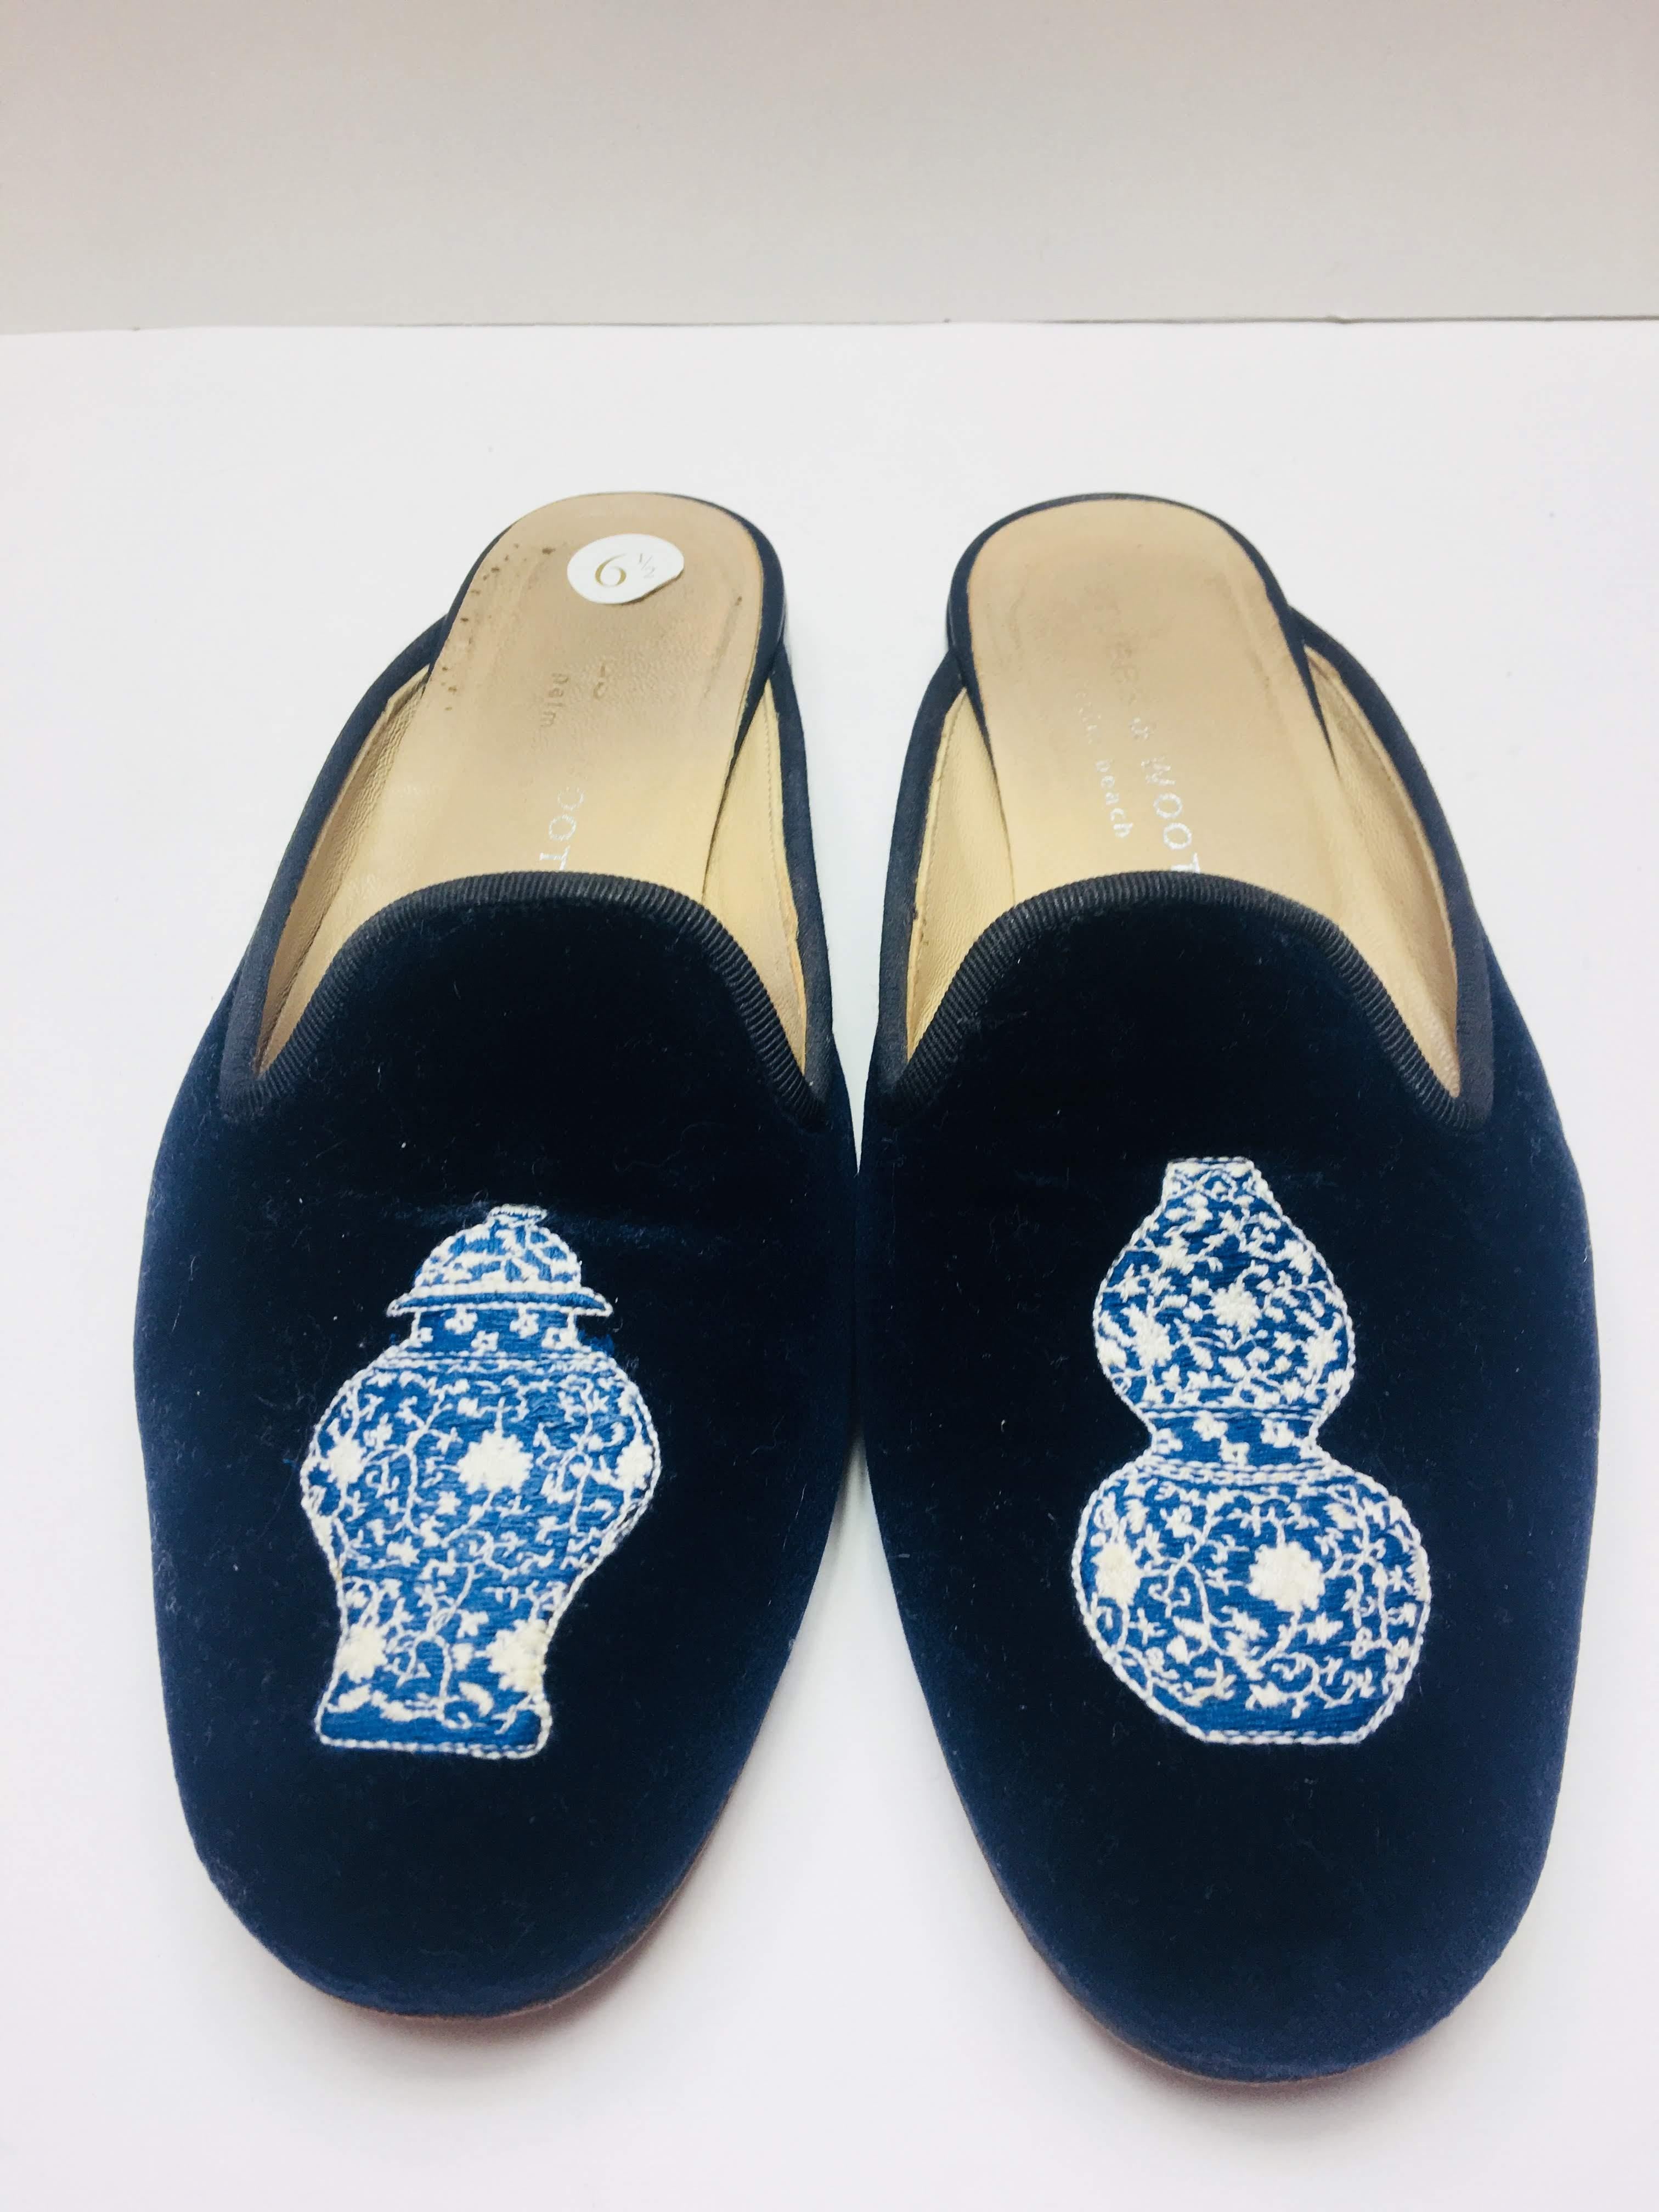 Stubbs & Wootton Black Mule with Blue/Creme Embroidered Details 
Velvet & Genuine Leather
Slightly Worn
Size 6.5 - Made In Spain